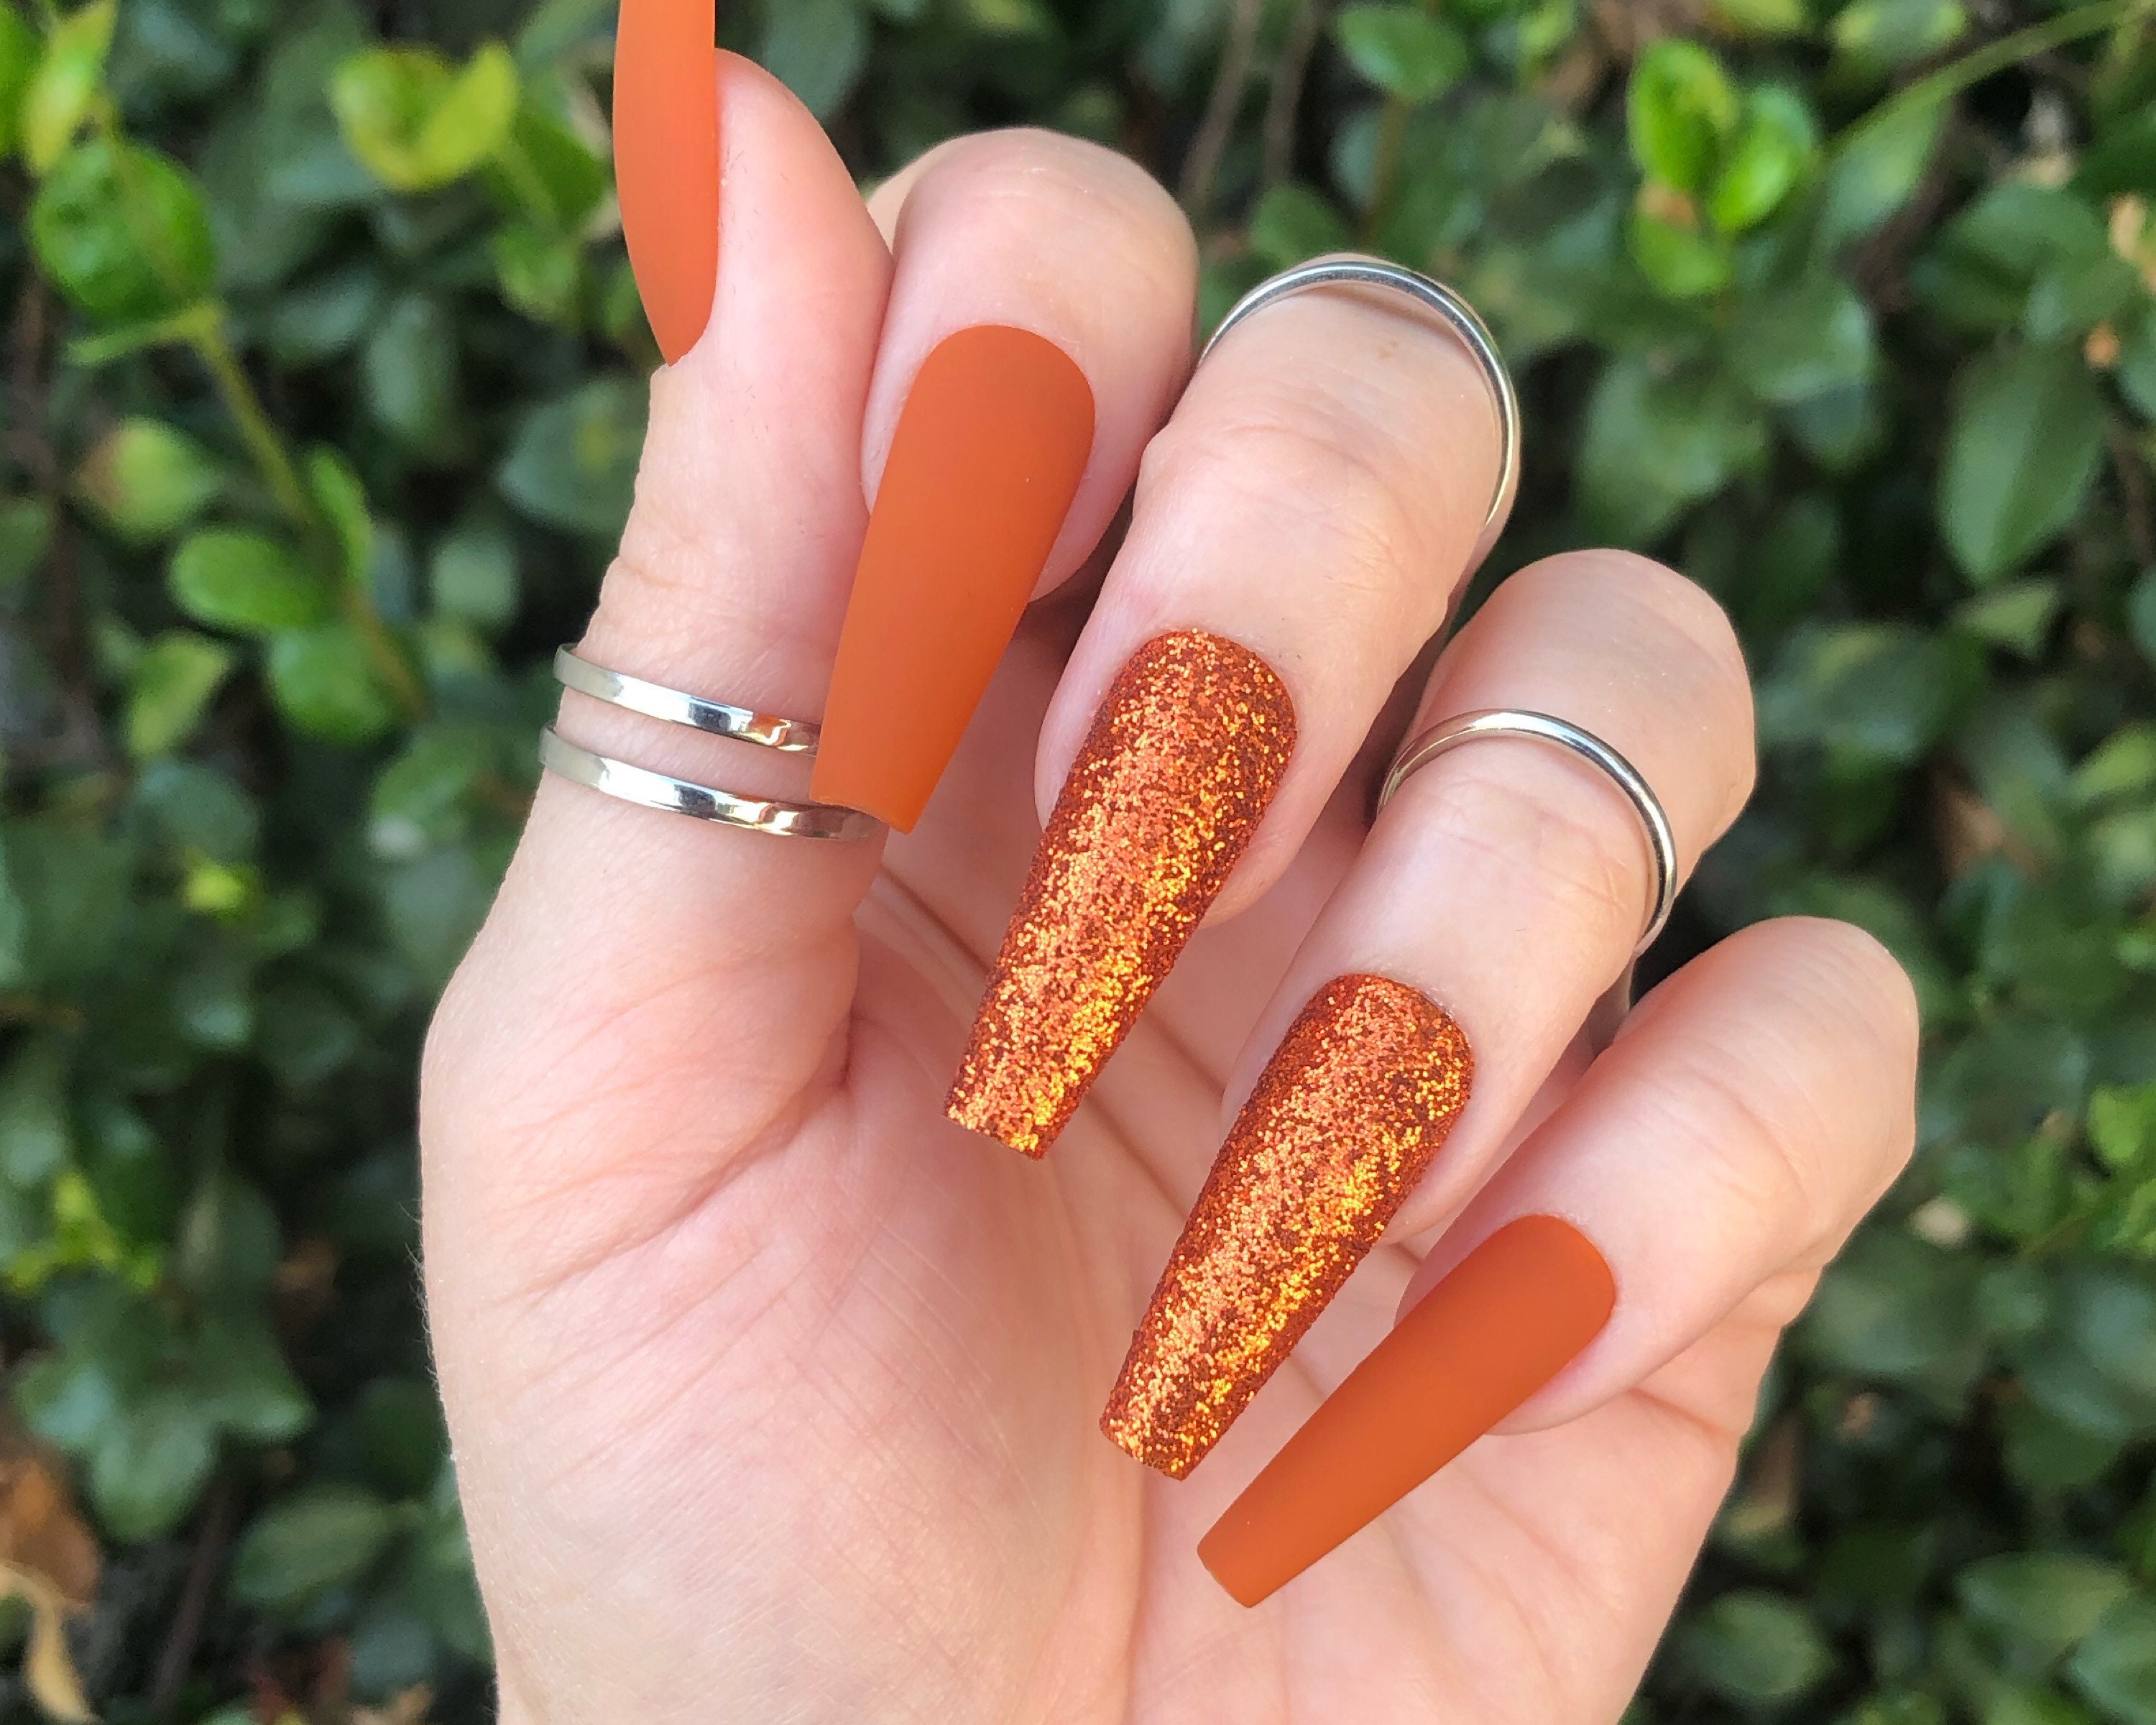 10. Matte Burnt Orange Nails for a Cozy Fall Feel - wide 3